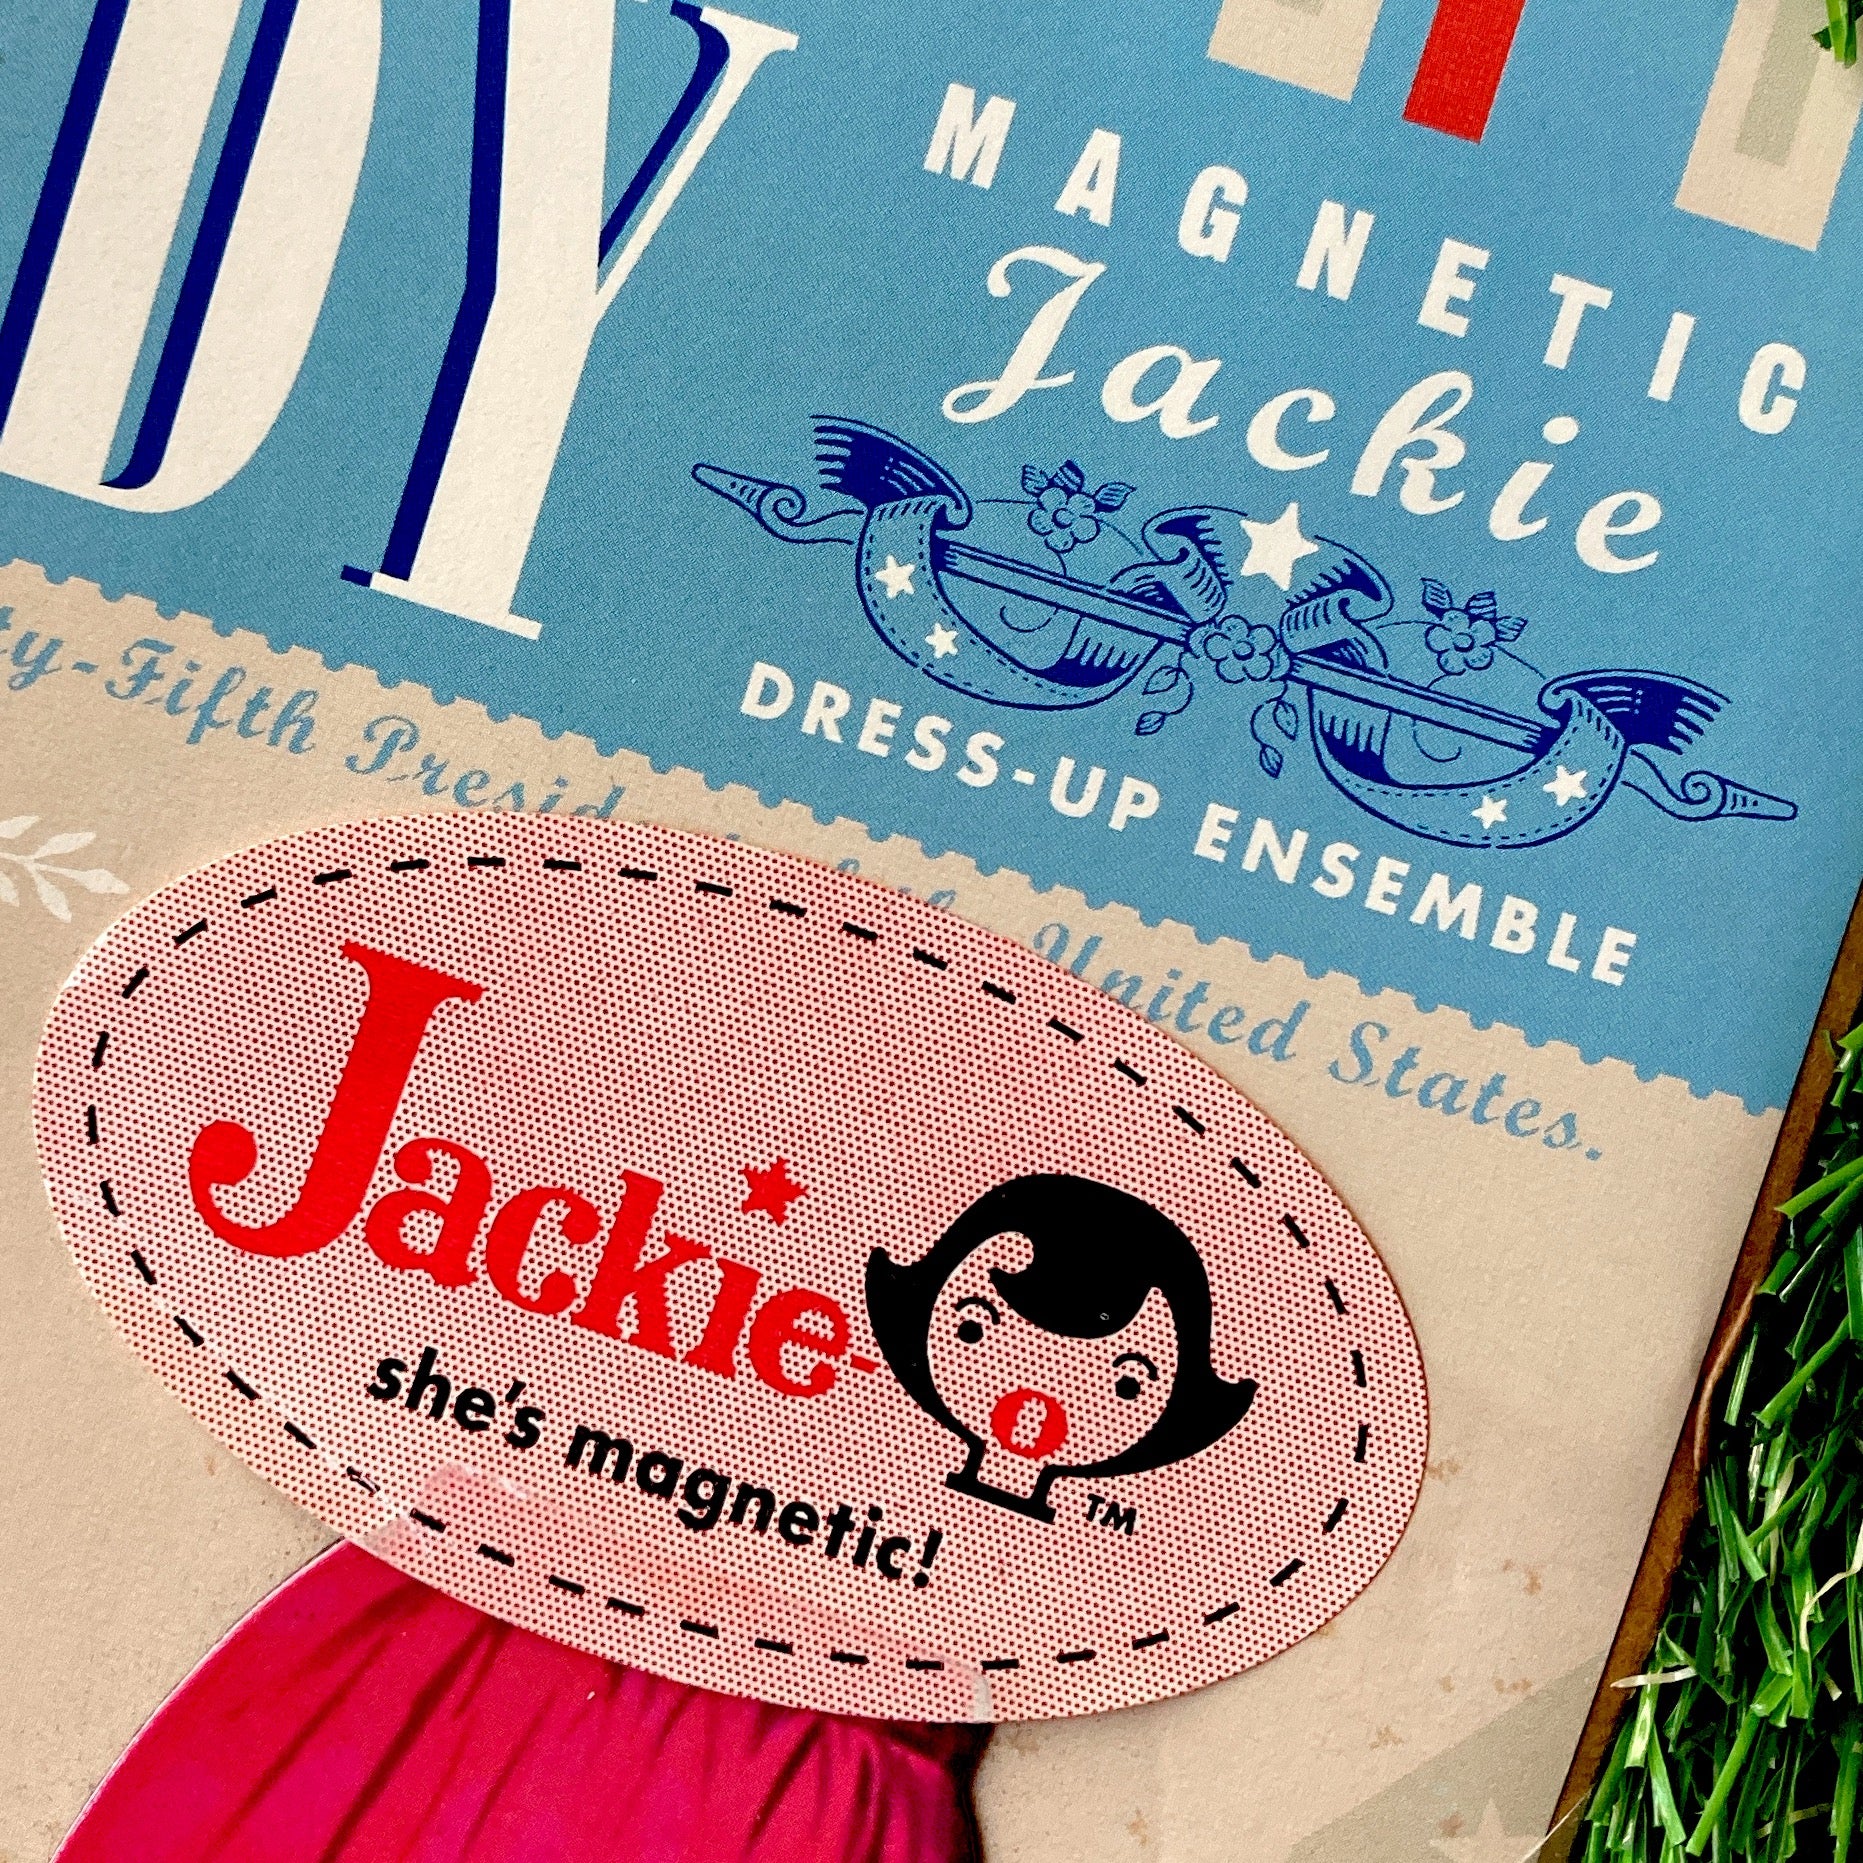 The First Lady Magnetic Jackie Dress-Up Ensemble